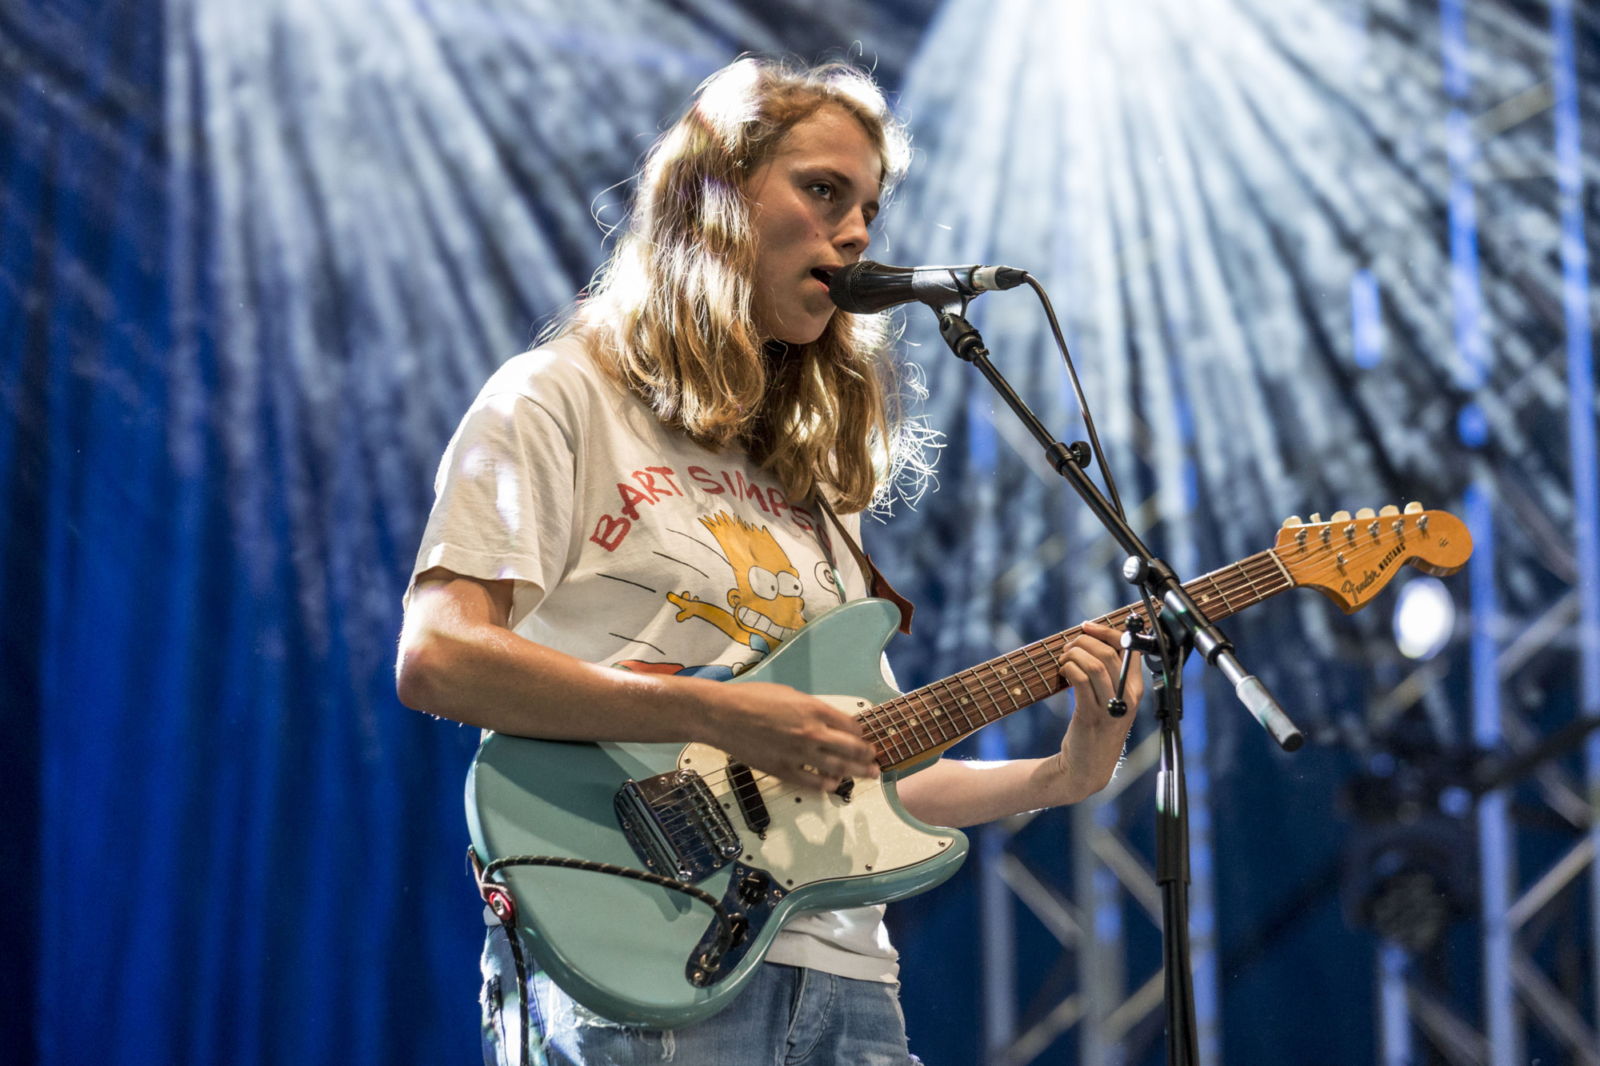 Marika Hackman, Yak, and No Age added to Visions 2018